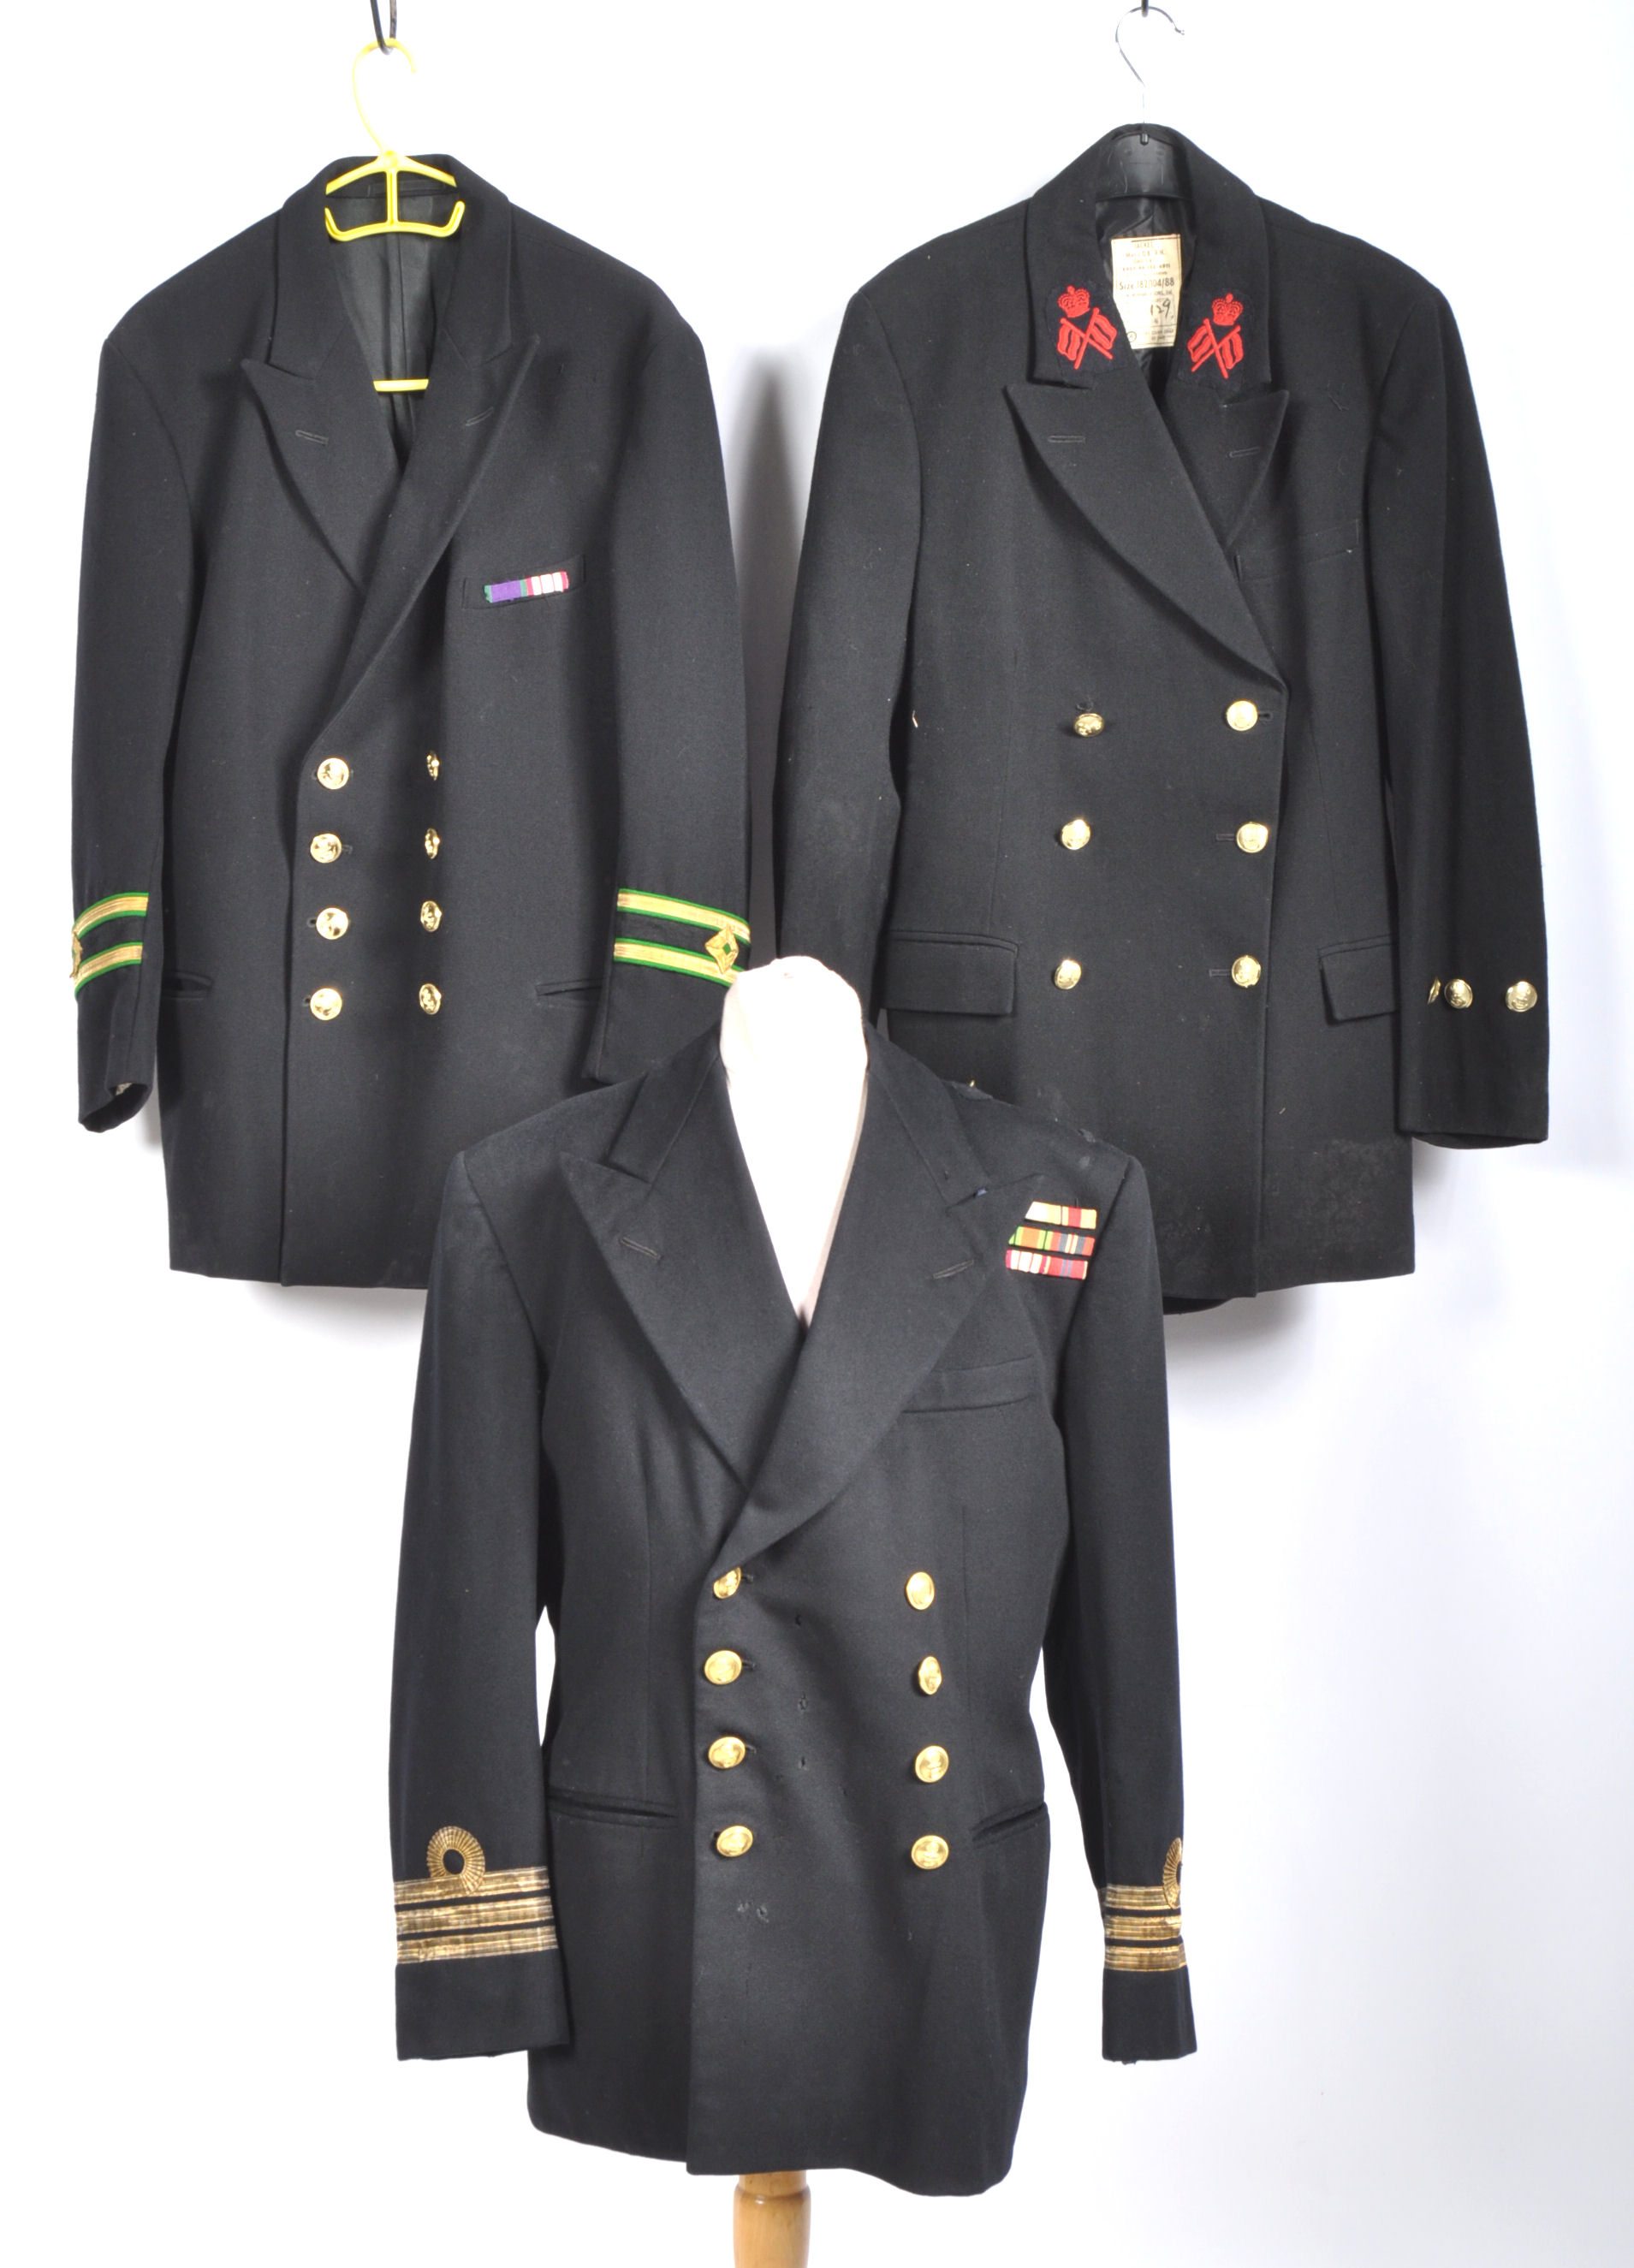 UNIFORMS & FANCY DRESS - A COLLECTION OF THREE BRITISH ROYAL NAVY UNIFORM JACKETS.